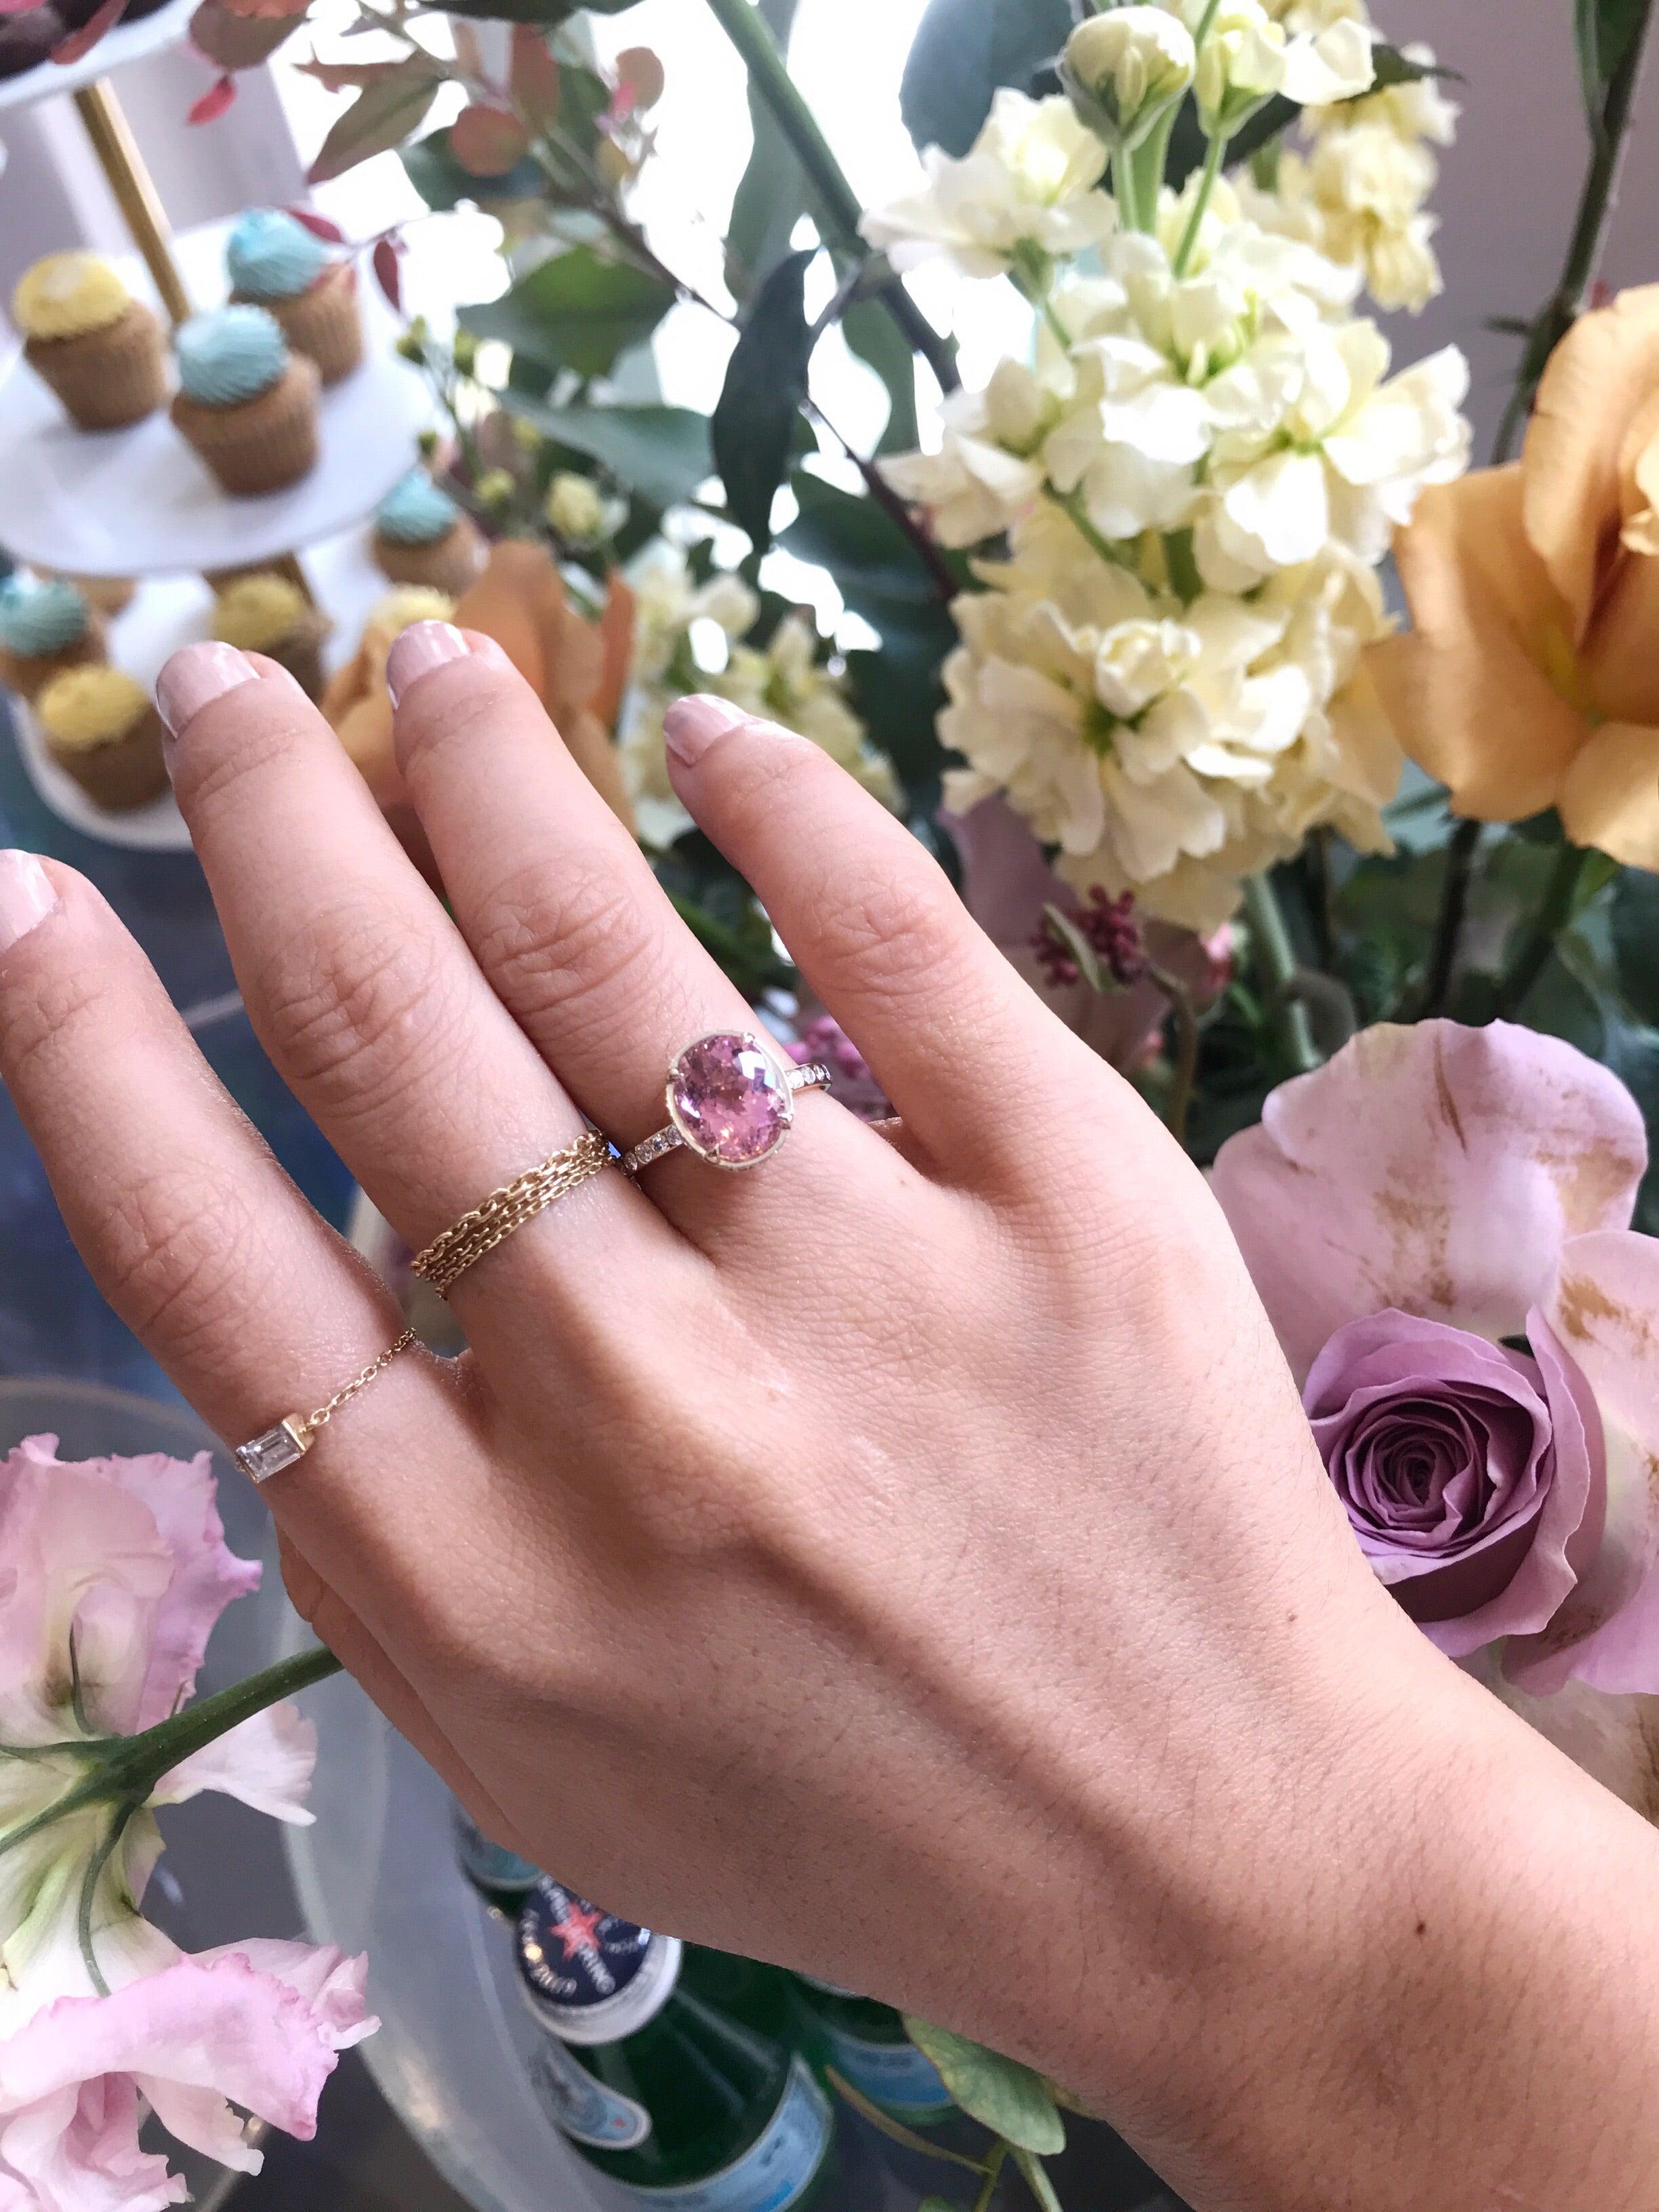 This Pink Tourmaline and Diamond halo ring is a feminine and modern classic. The elegant and modern design features a pink tourmaline propped up by a halo of white diamond just beneath the prong setting. This intricate and elegant center stone